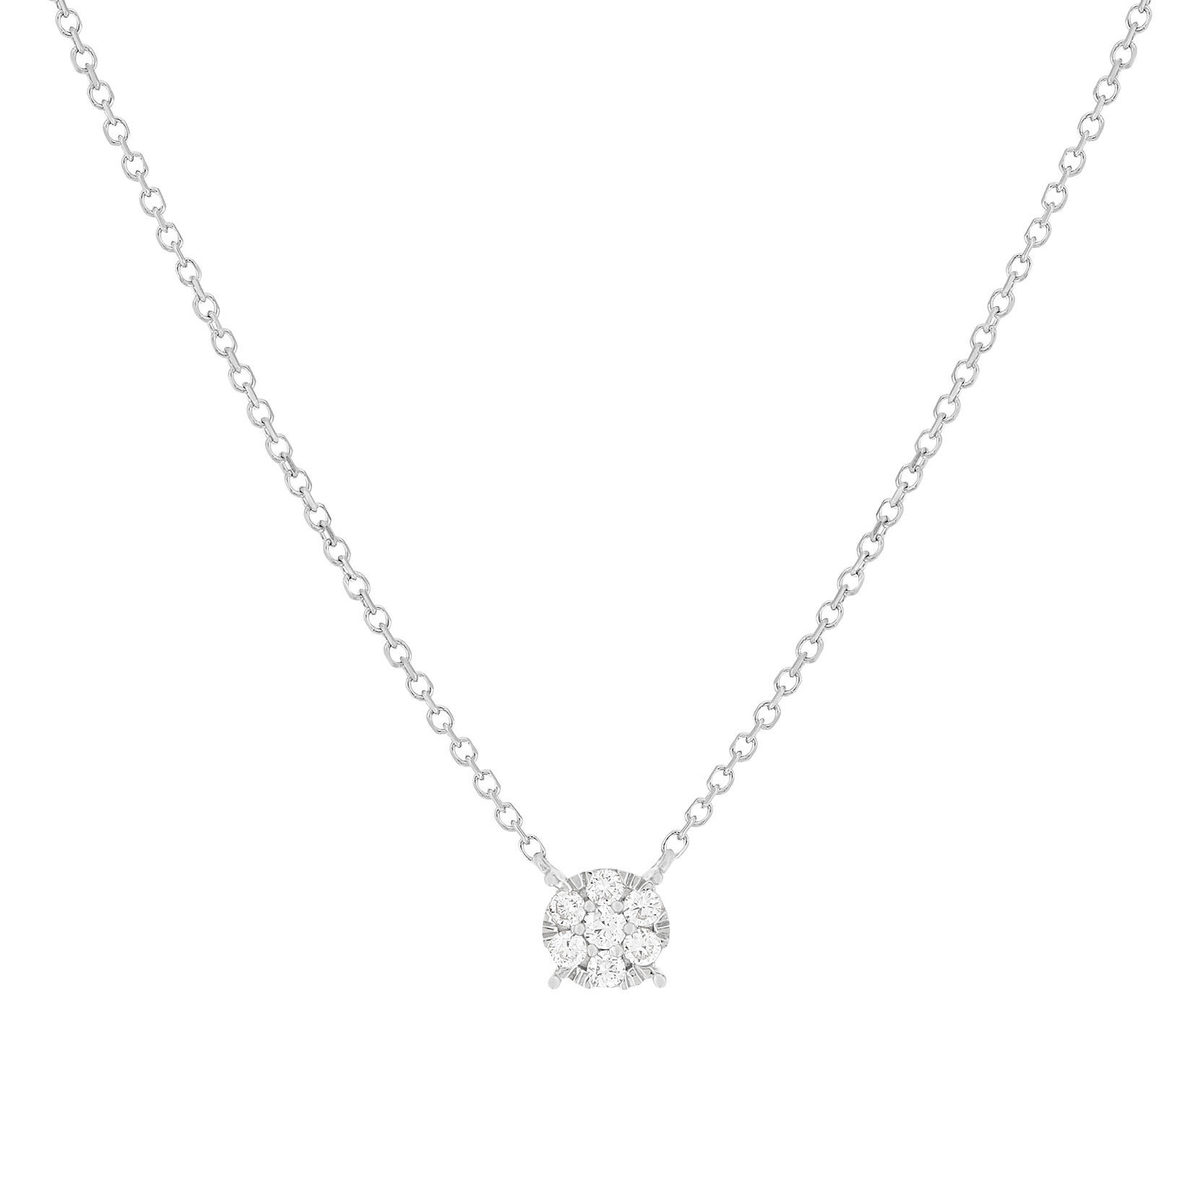 Collier or blanc 750 diamants synthétiques 0.10 carat